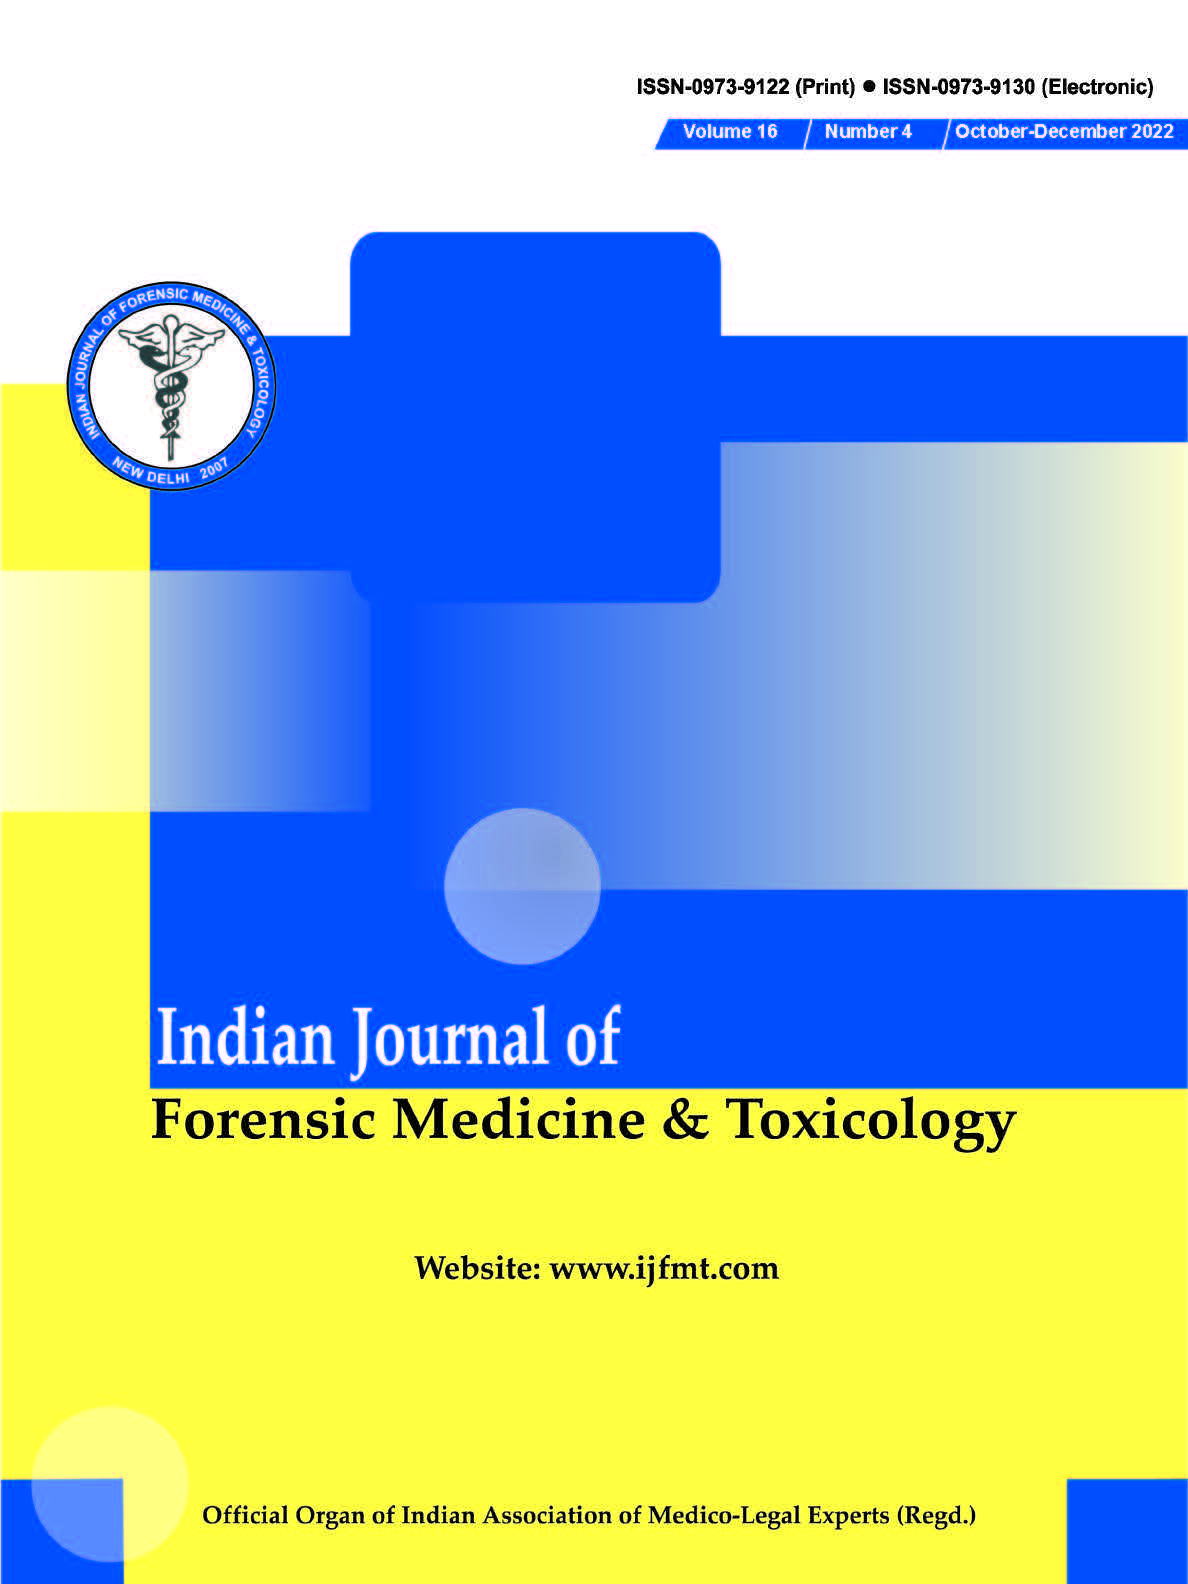 					View Vol. 16 No. 4 (2022): Indian Journal of Forensic Medicine and Toxicology
				